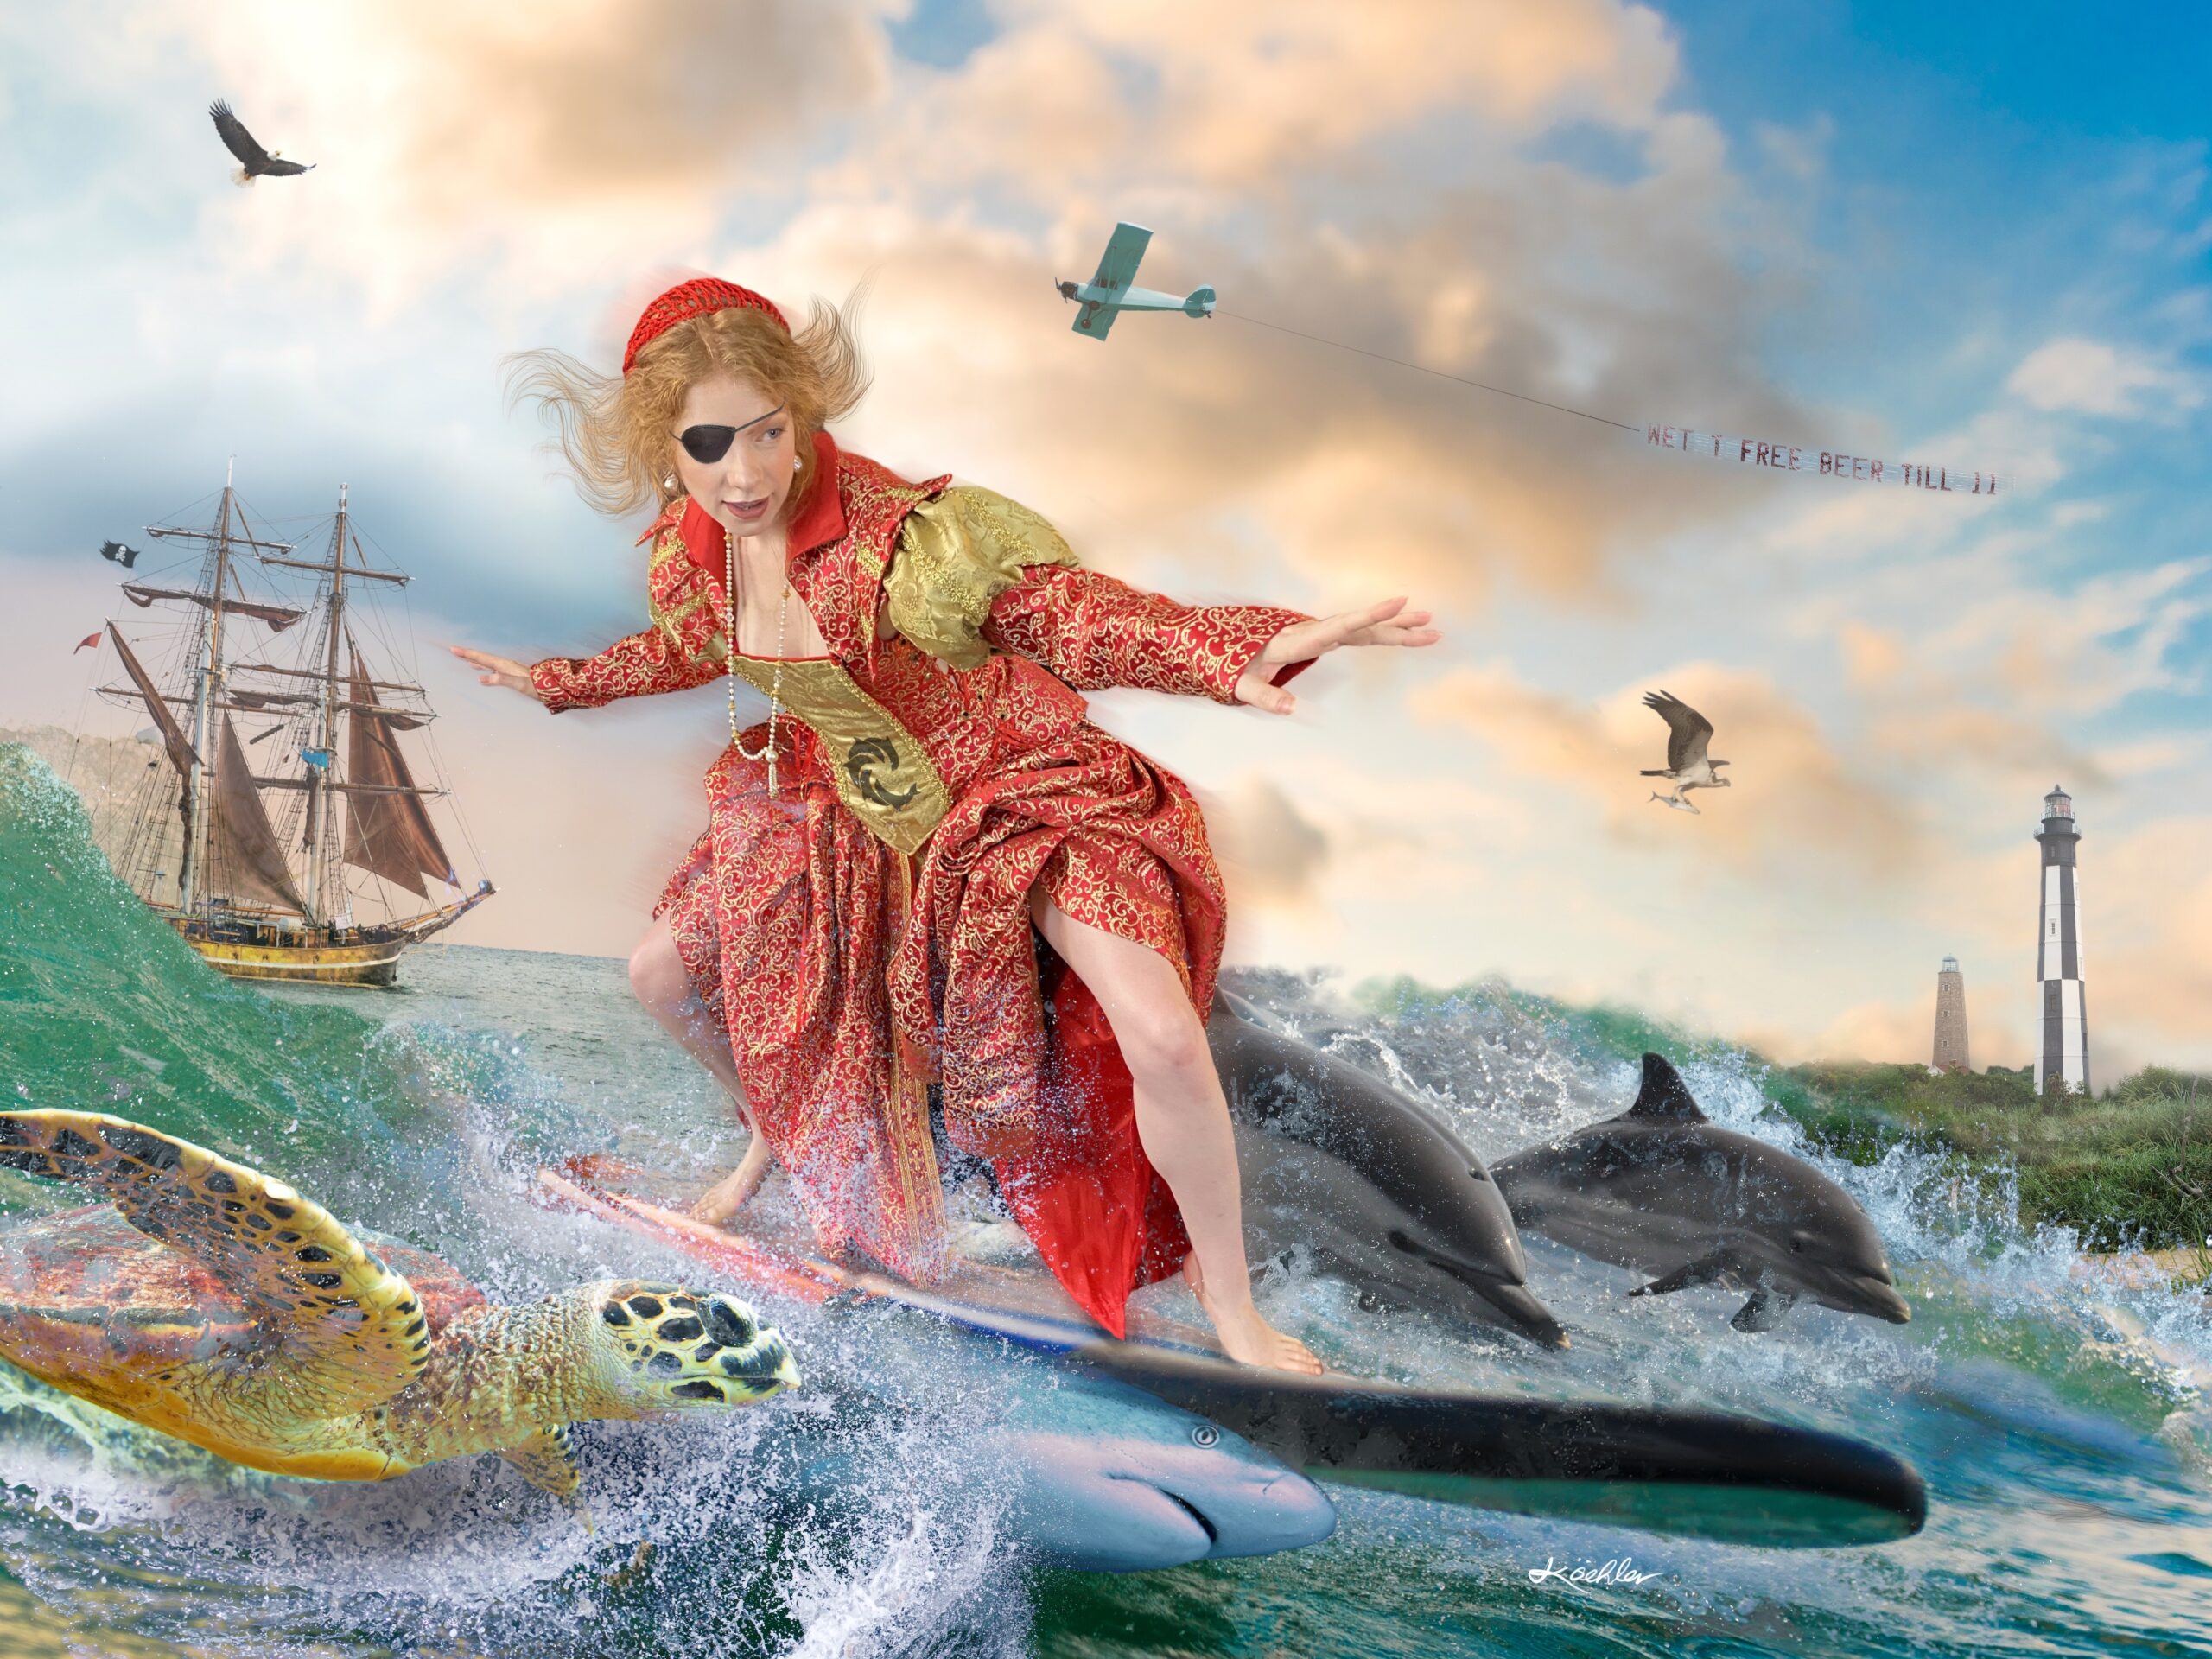 Submission to FOCAL LOCAL art show features Lady Pirates